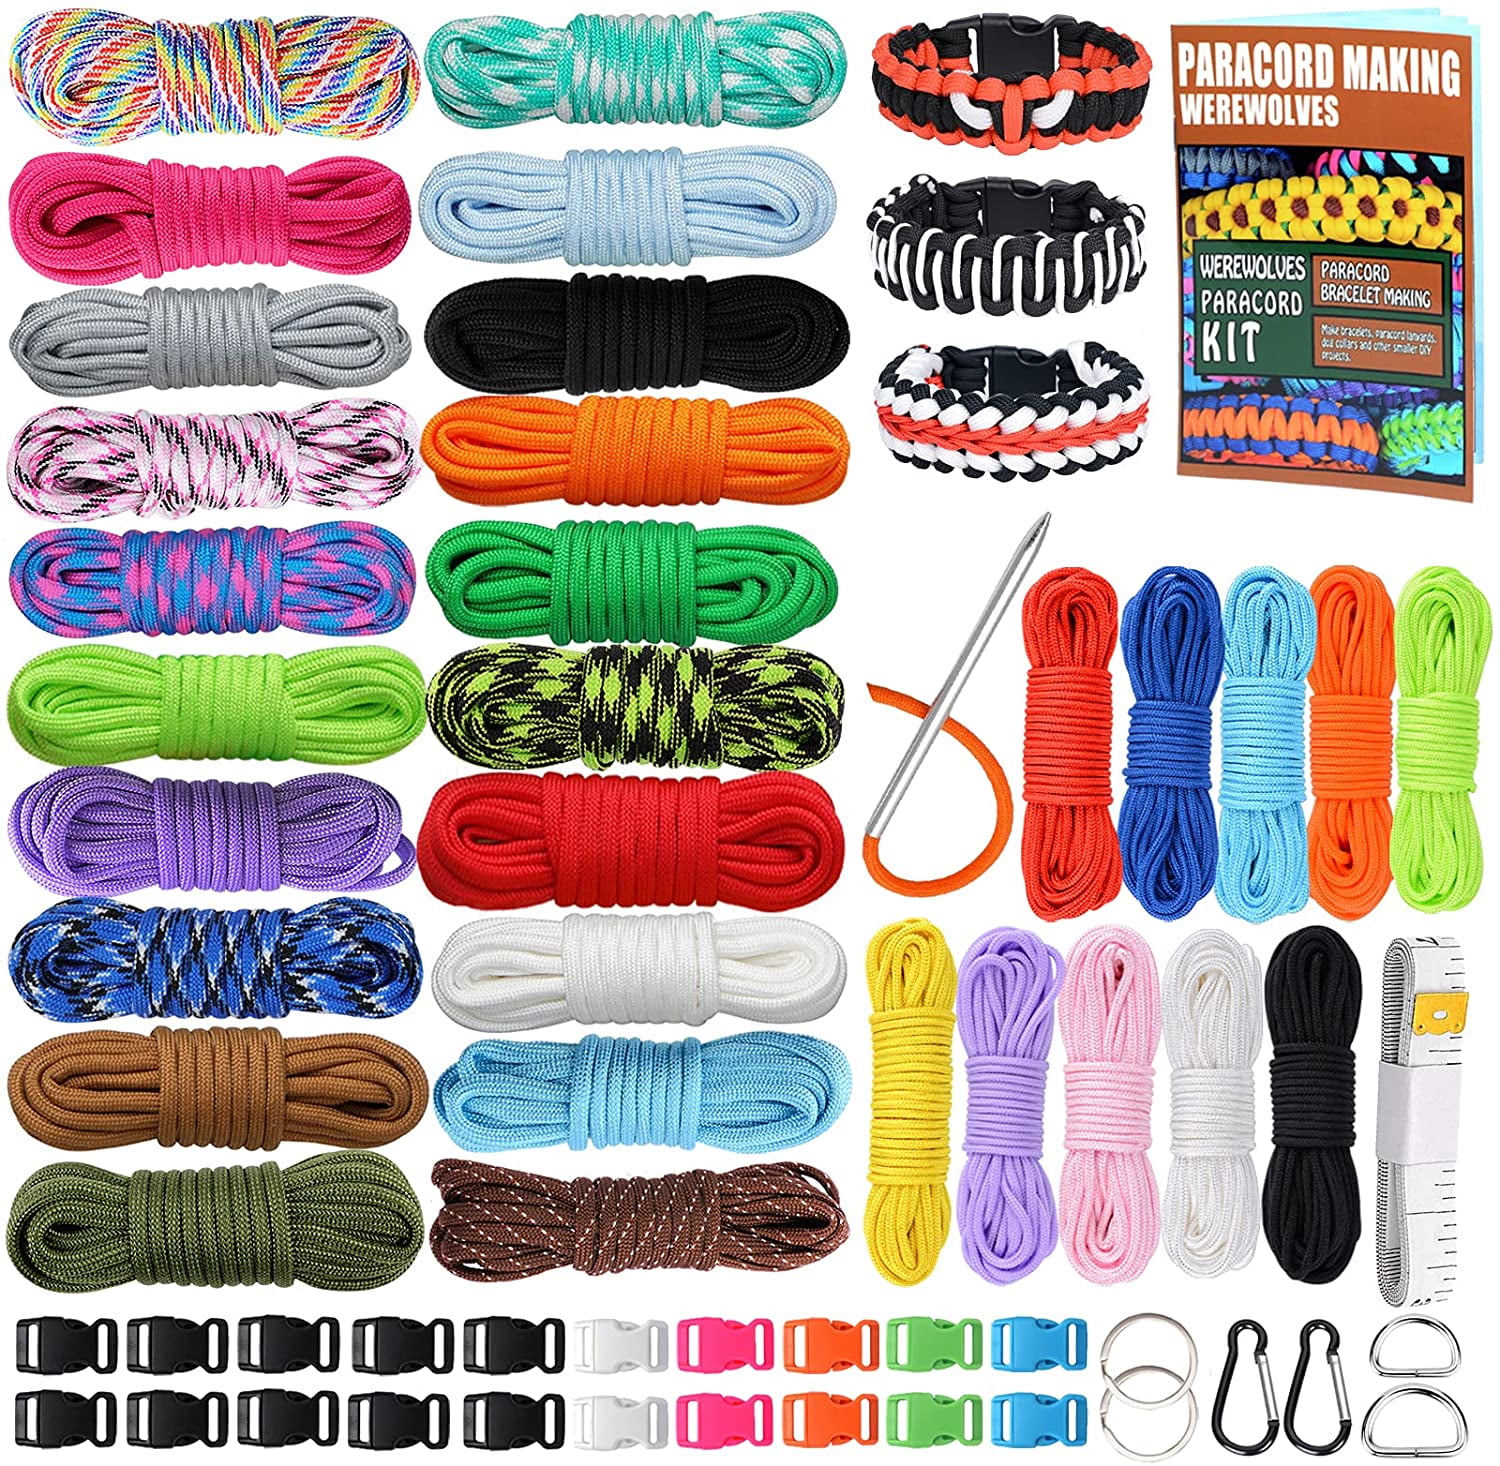 30 Colors 4mm Paracord & 6 Colors 2mm Paracord with FID MONOBIN Paracord Bracelets Kit Paracord Craft Kit with Complete Accessories for Kids and Adult Making Various Paracord Projects 